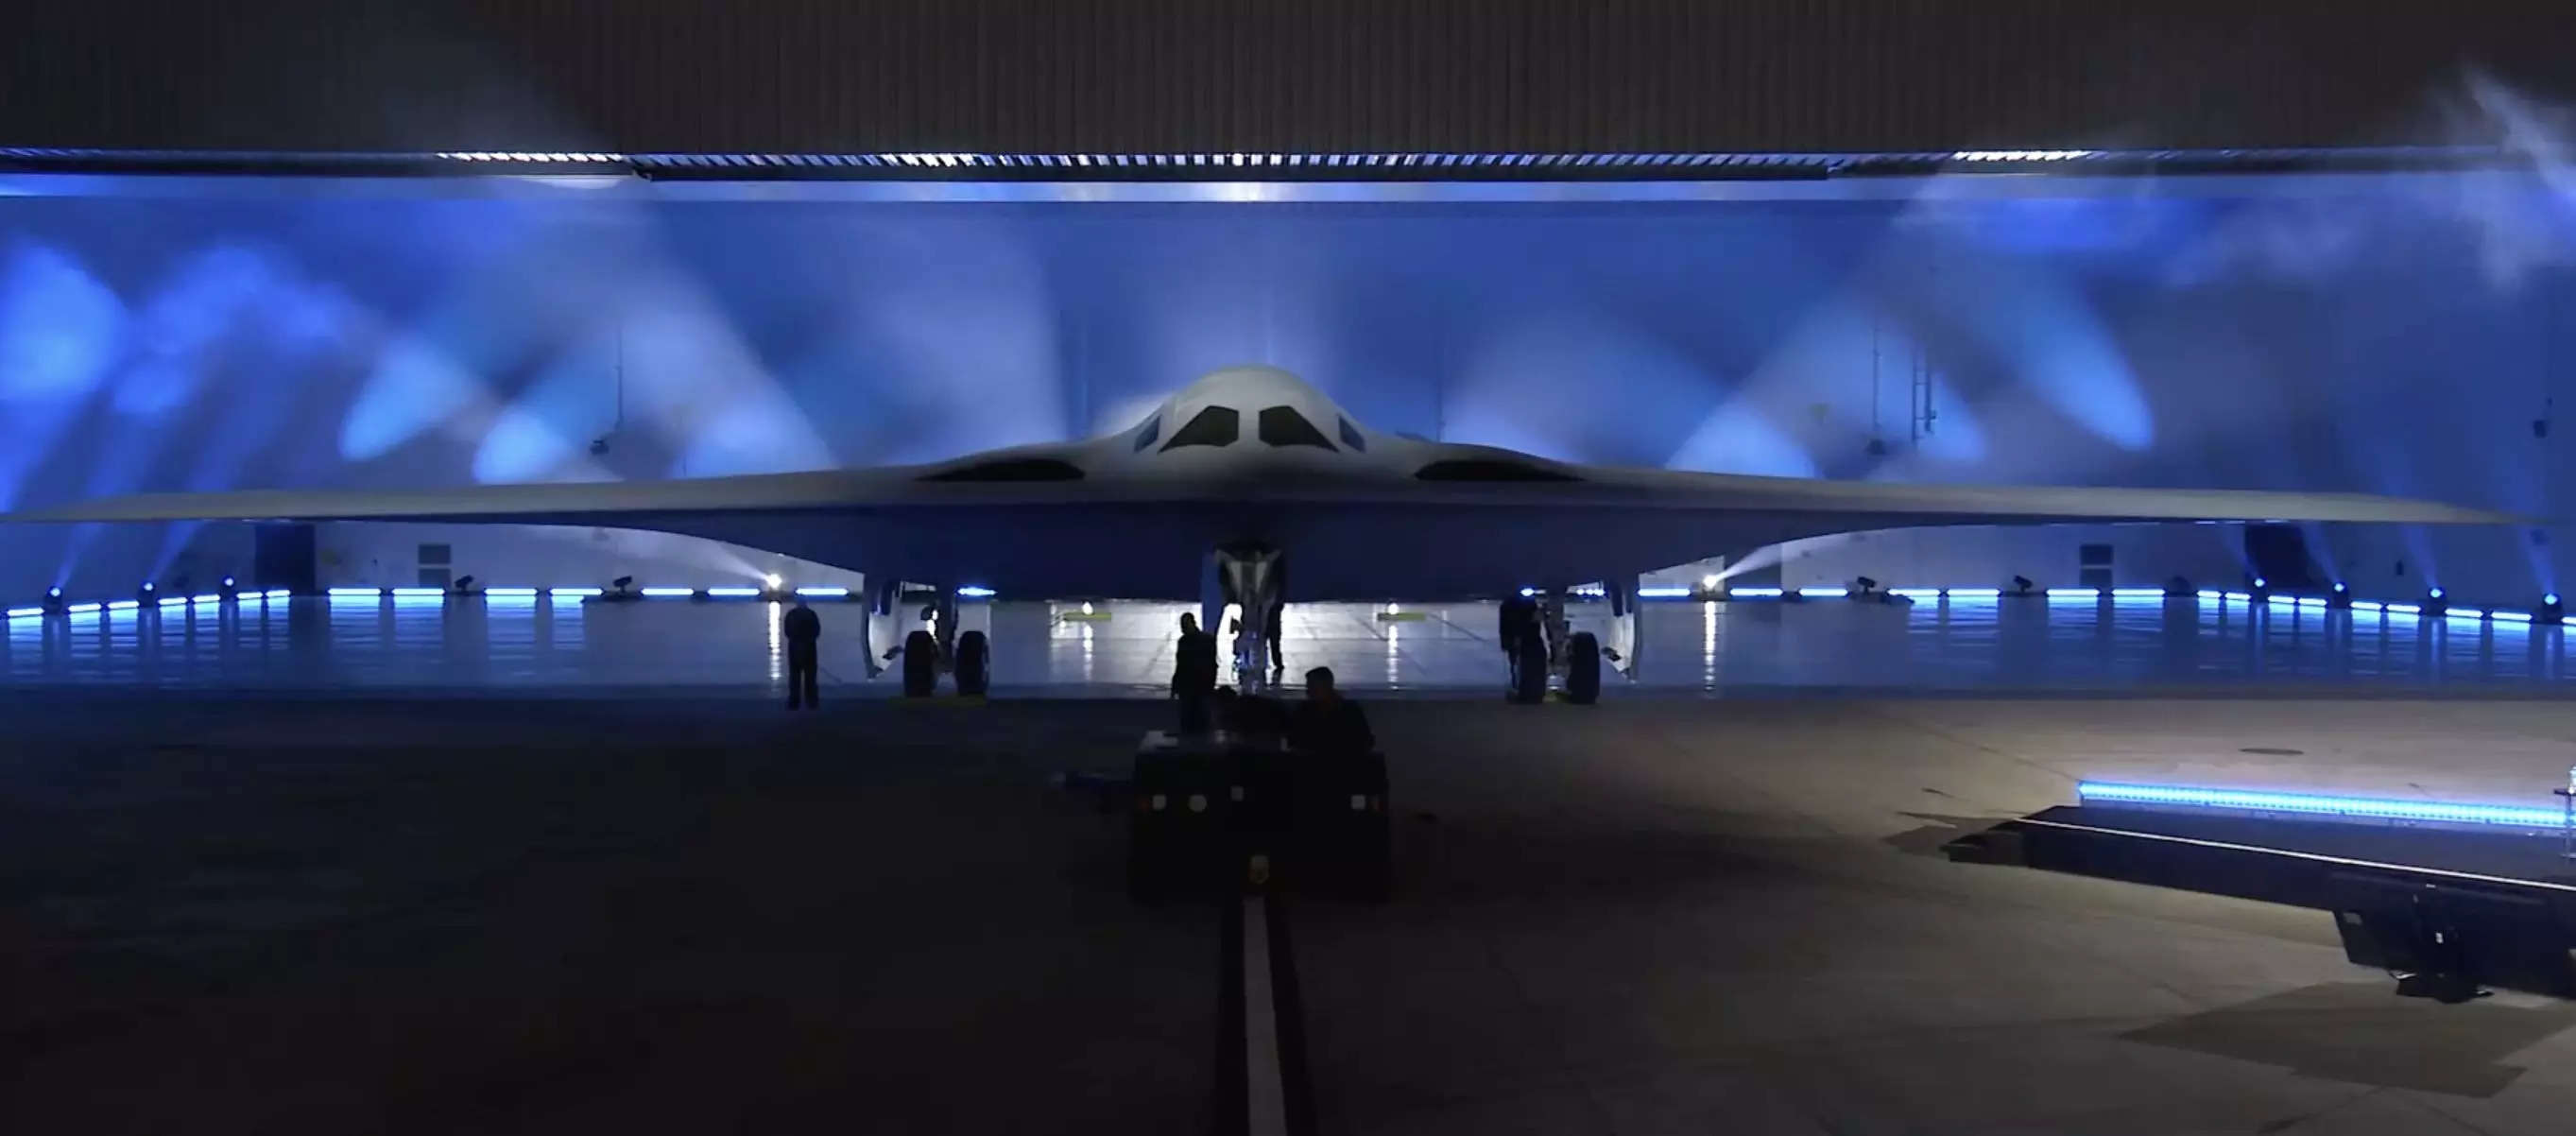 The B-21 Raider is unveiled.